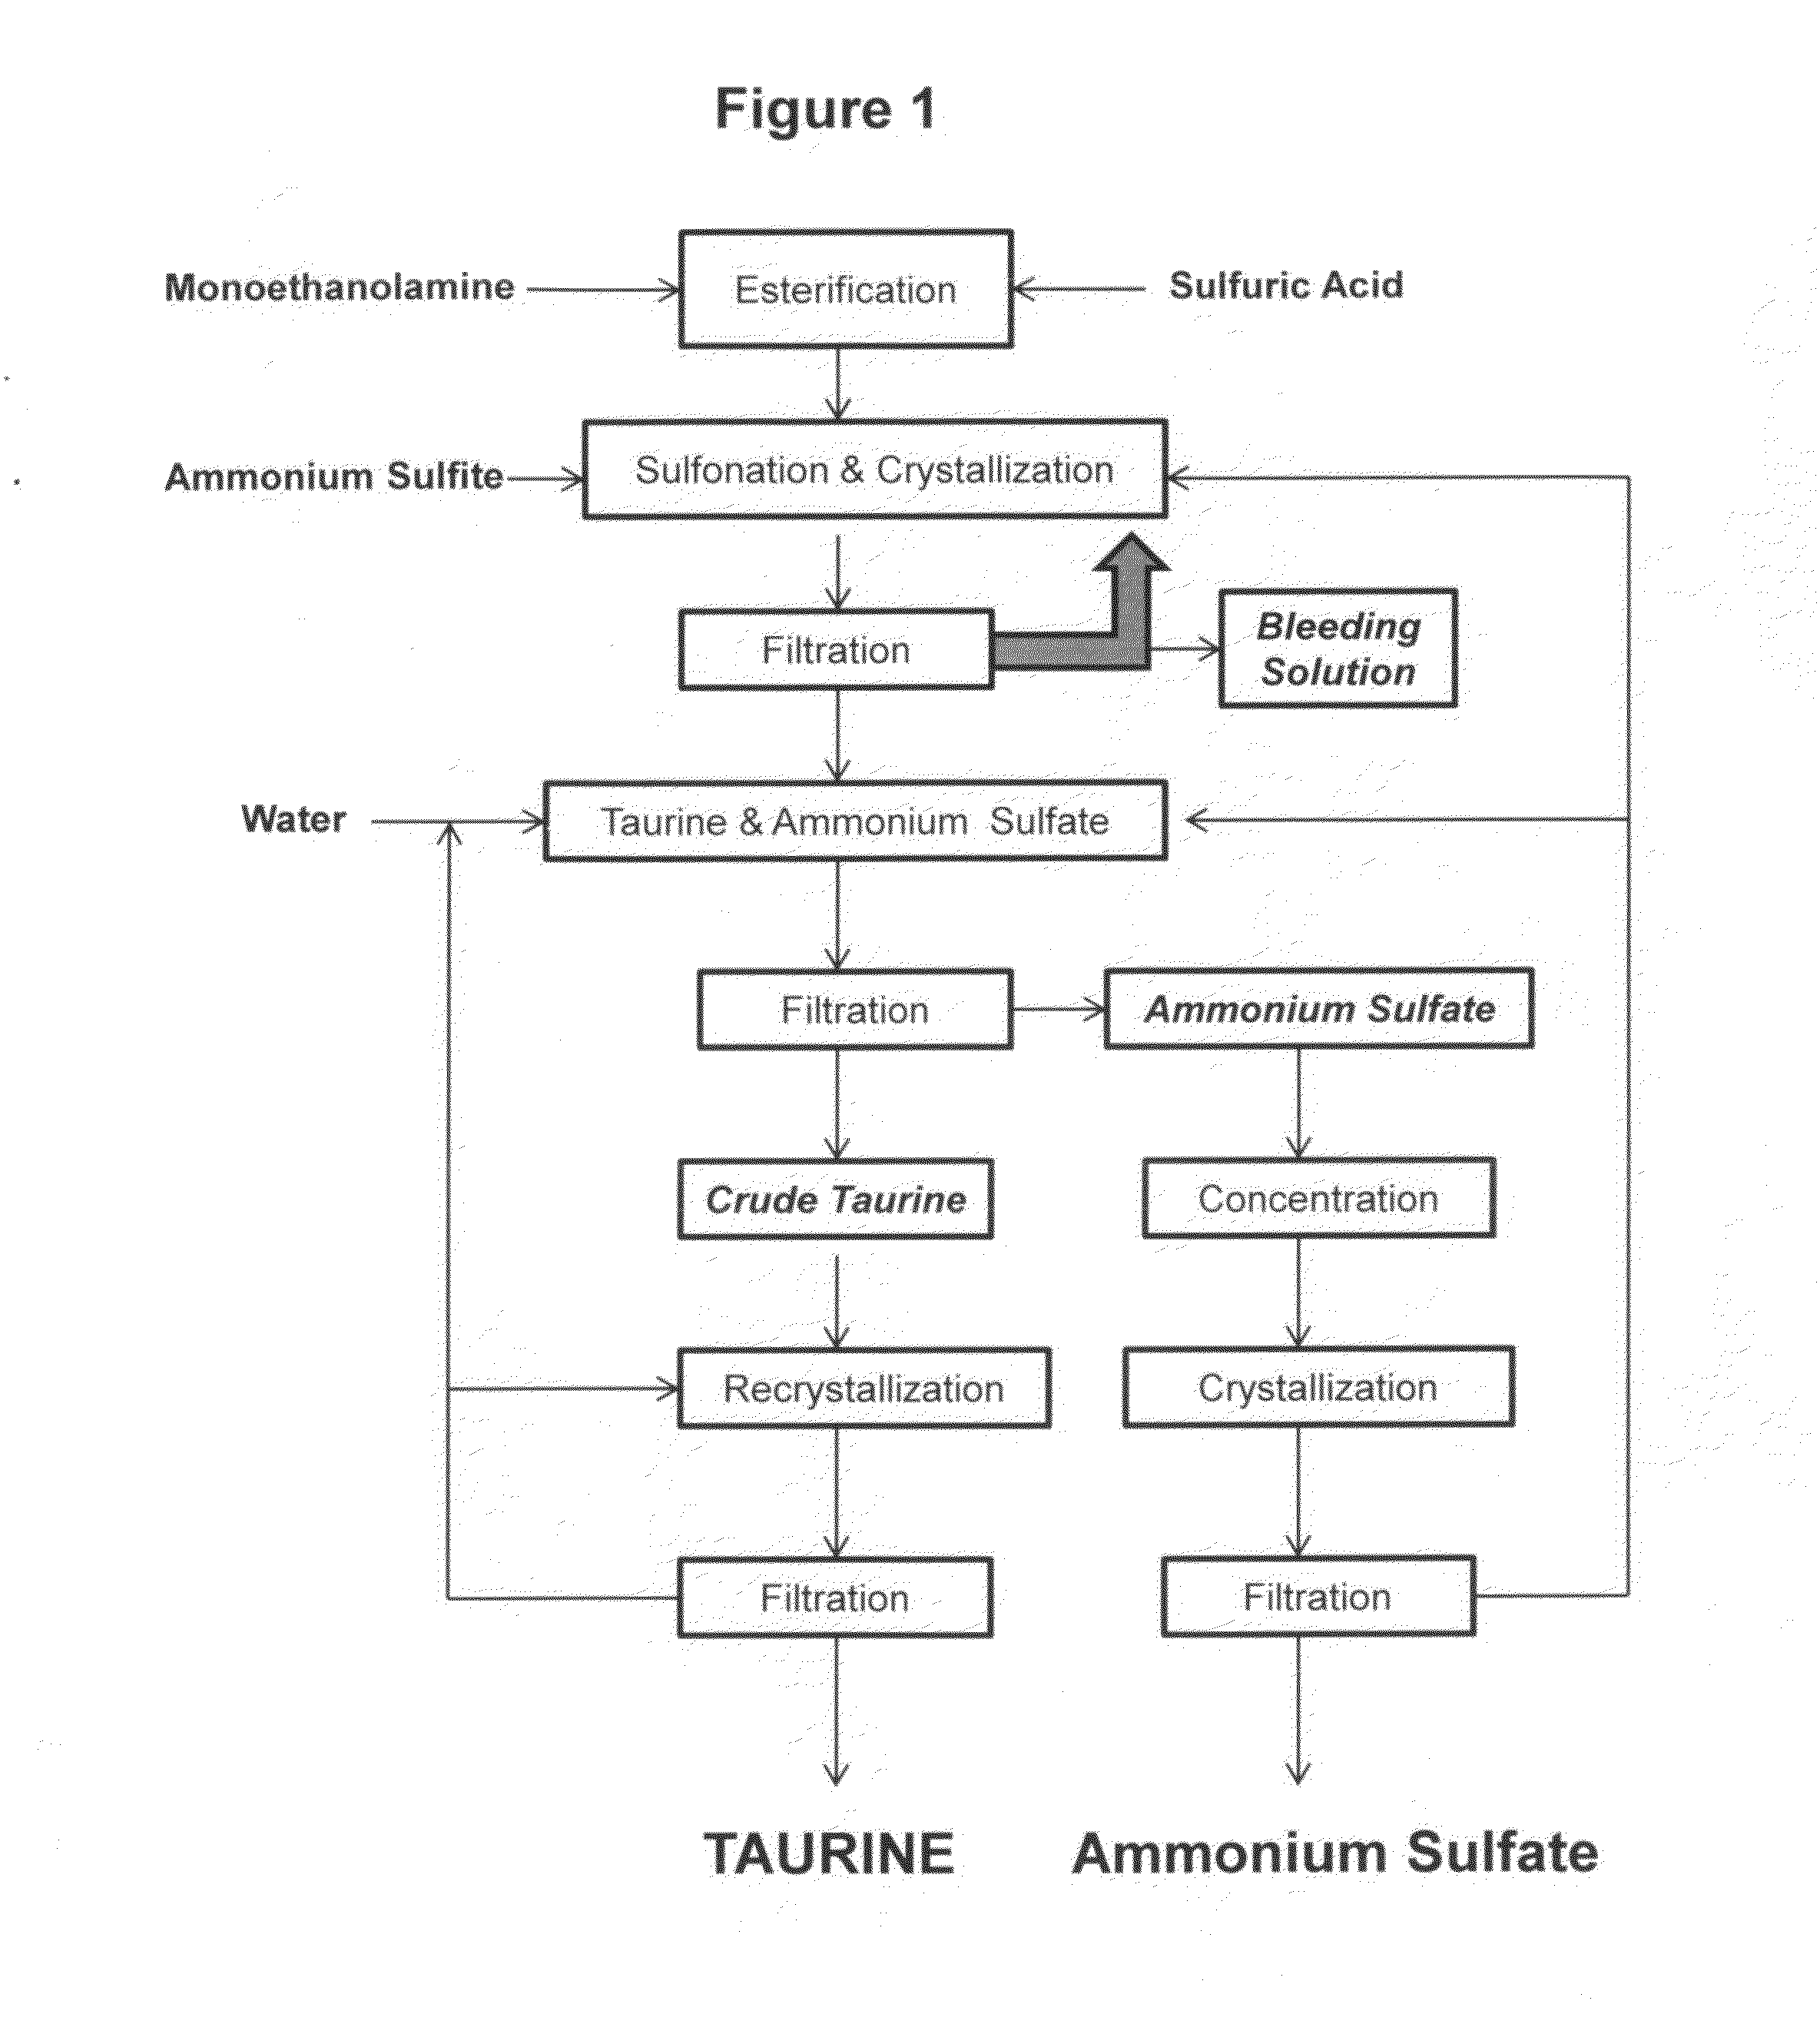 Cyclic process for the production of taurine from monoethanolamine